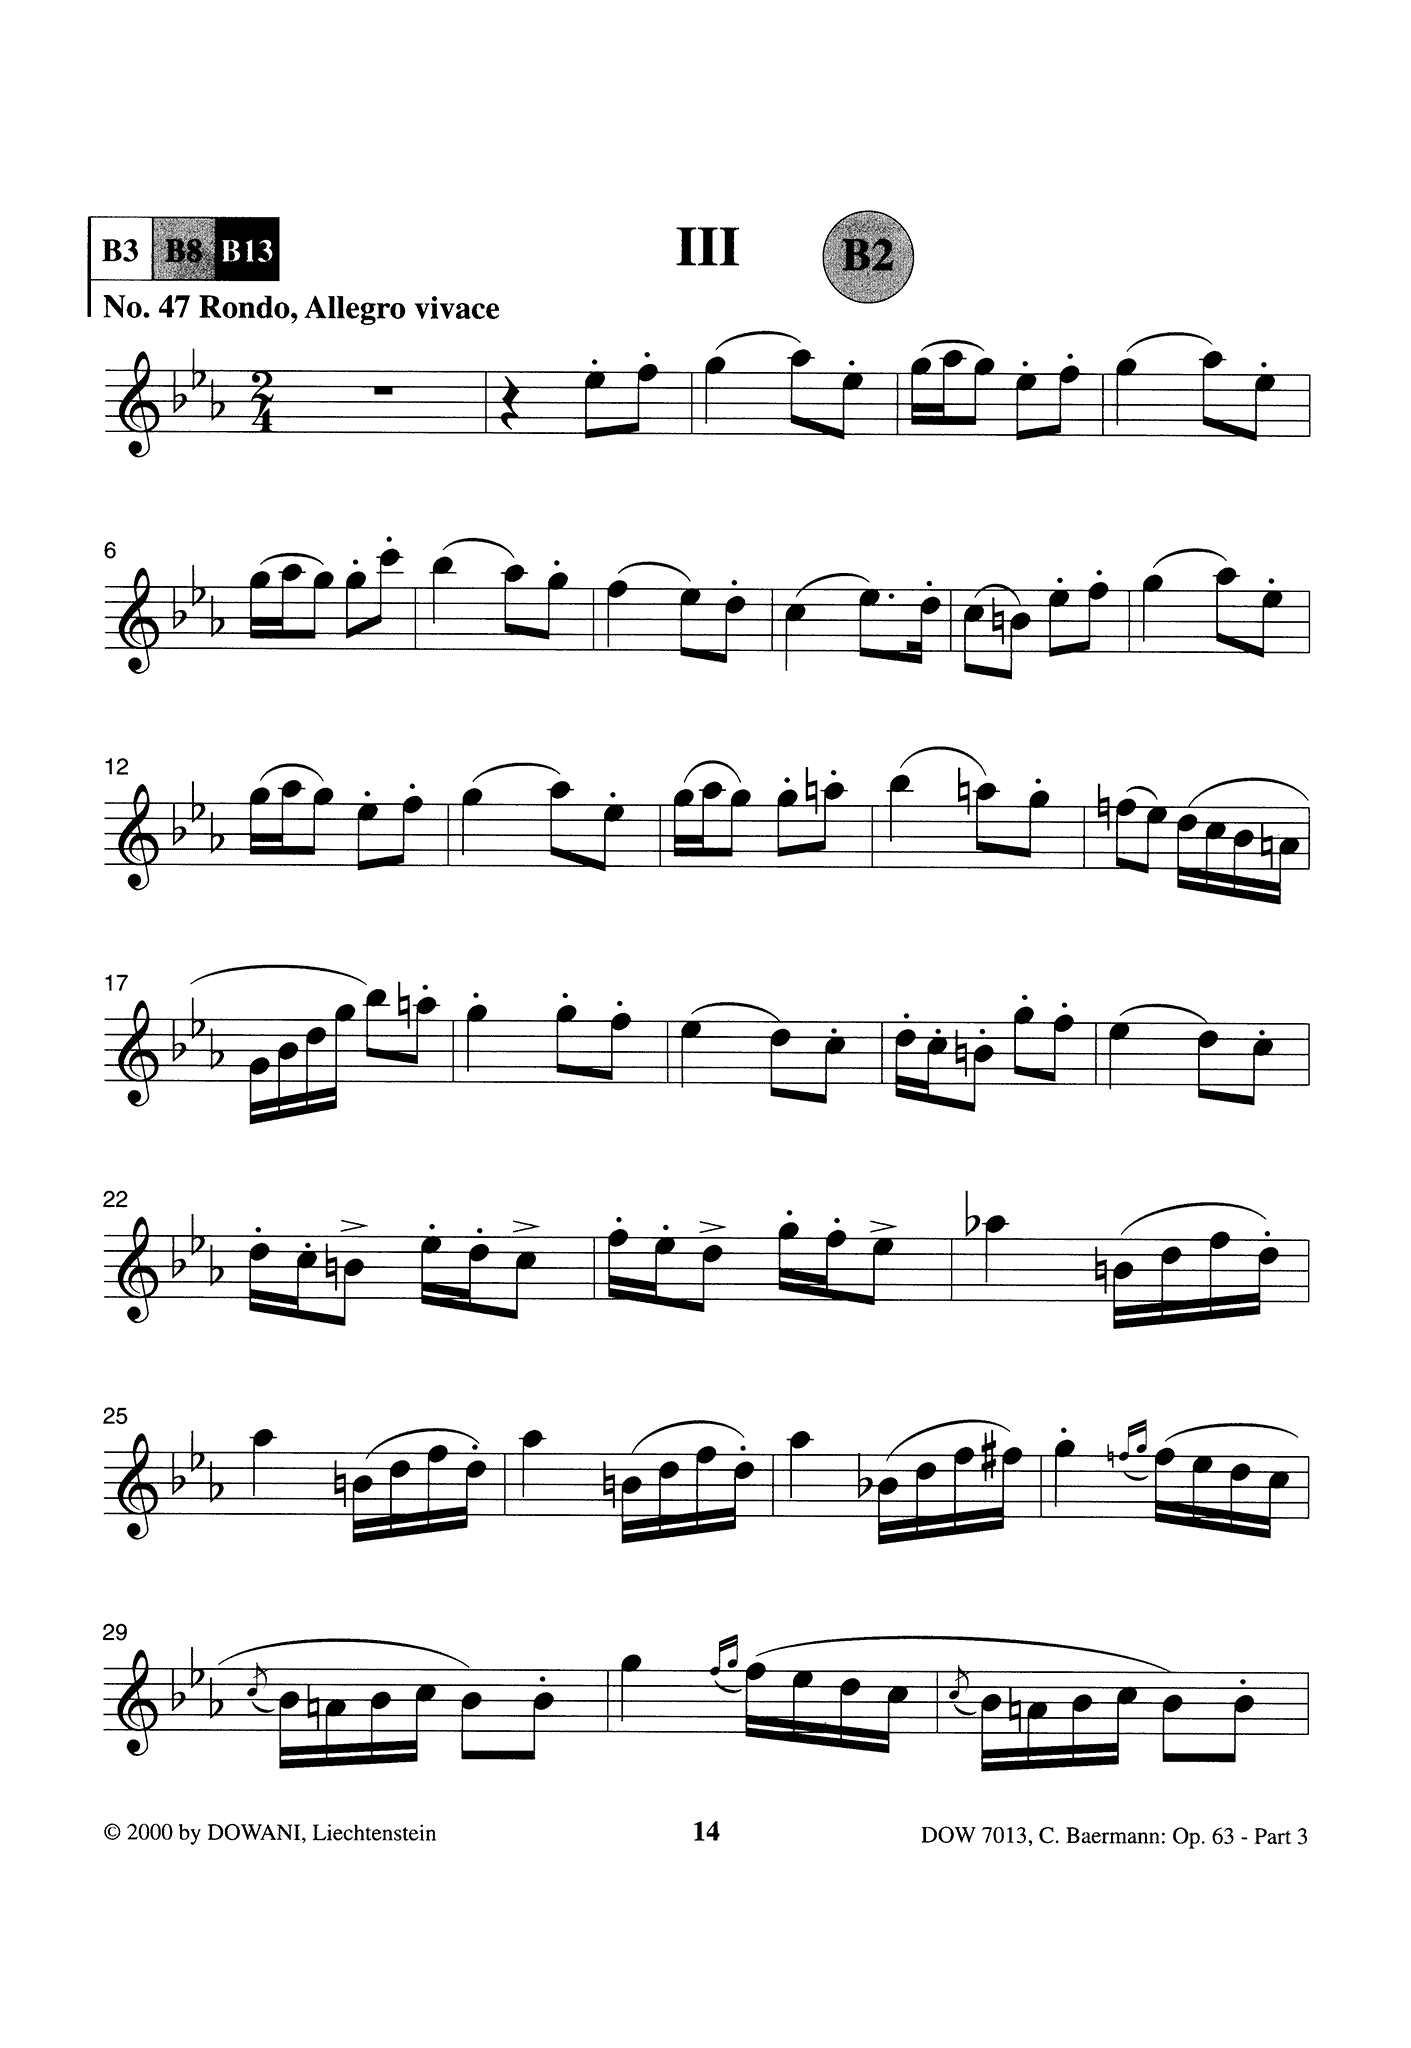 Clarinet Method, Op. 63, Div. II: Part 3 of 3 Clarinet part Page 14